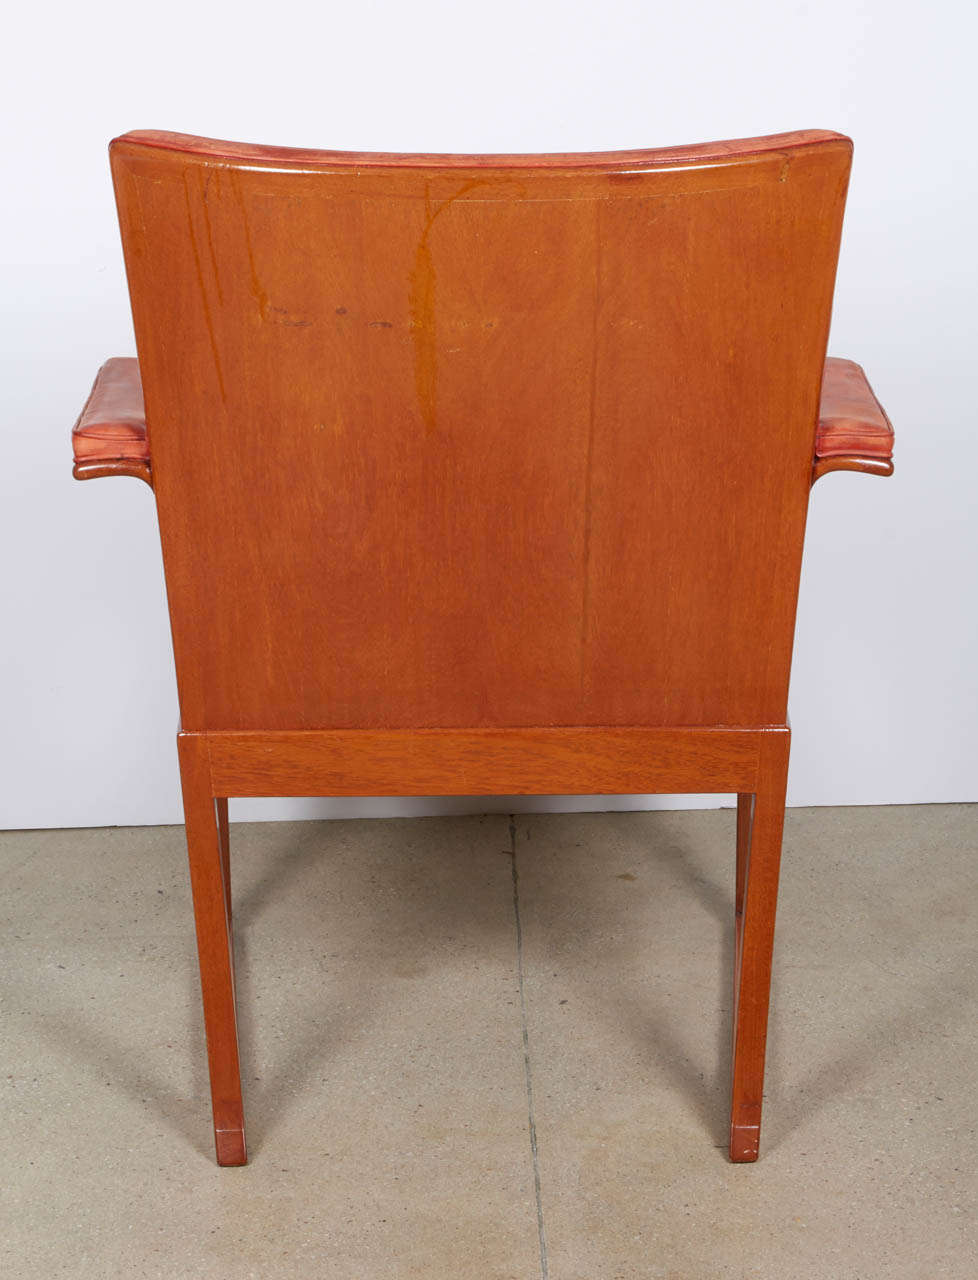 Mid-20th Century Mahogany Armchair Attributed to Frits Henningsen